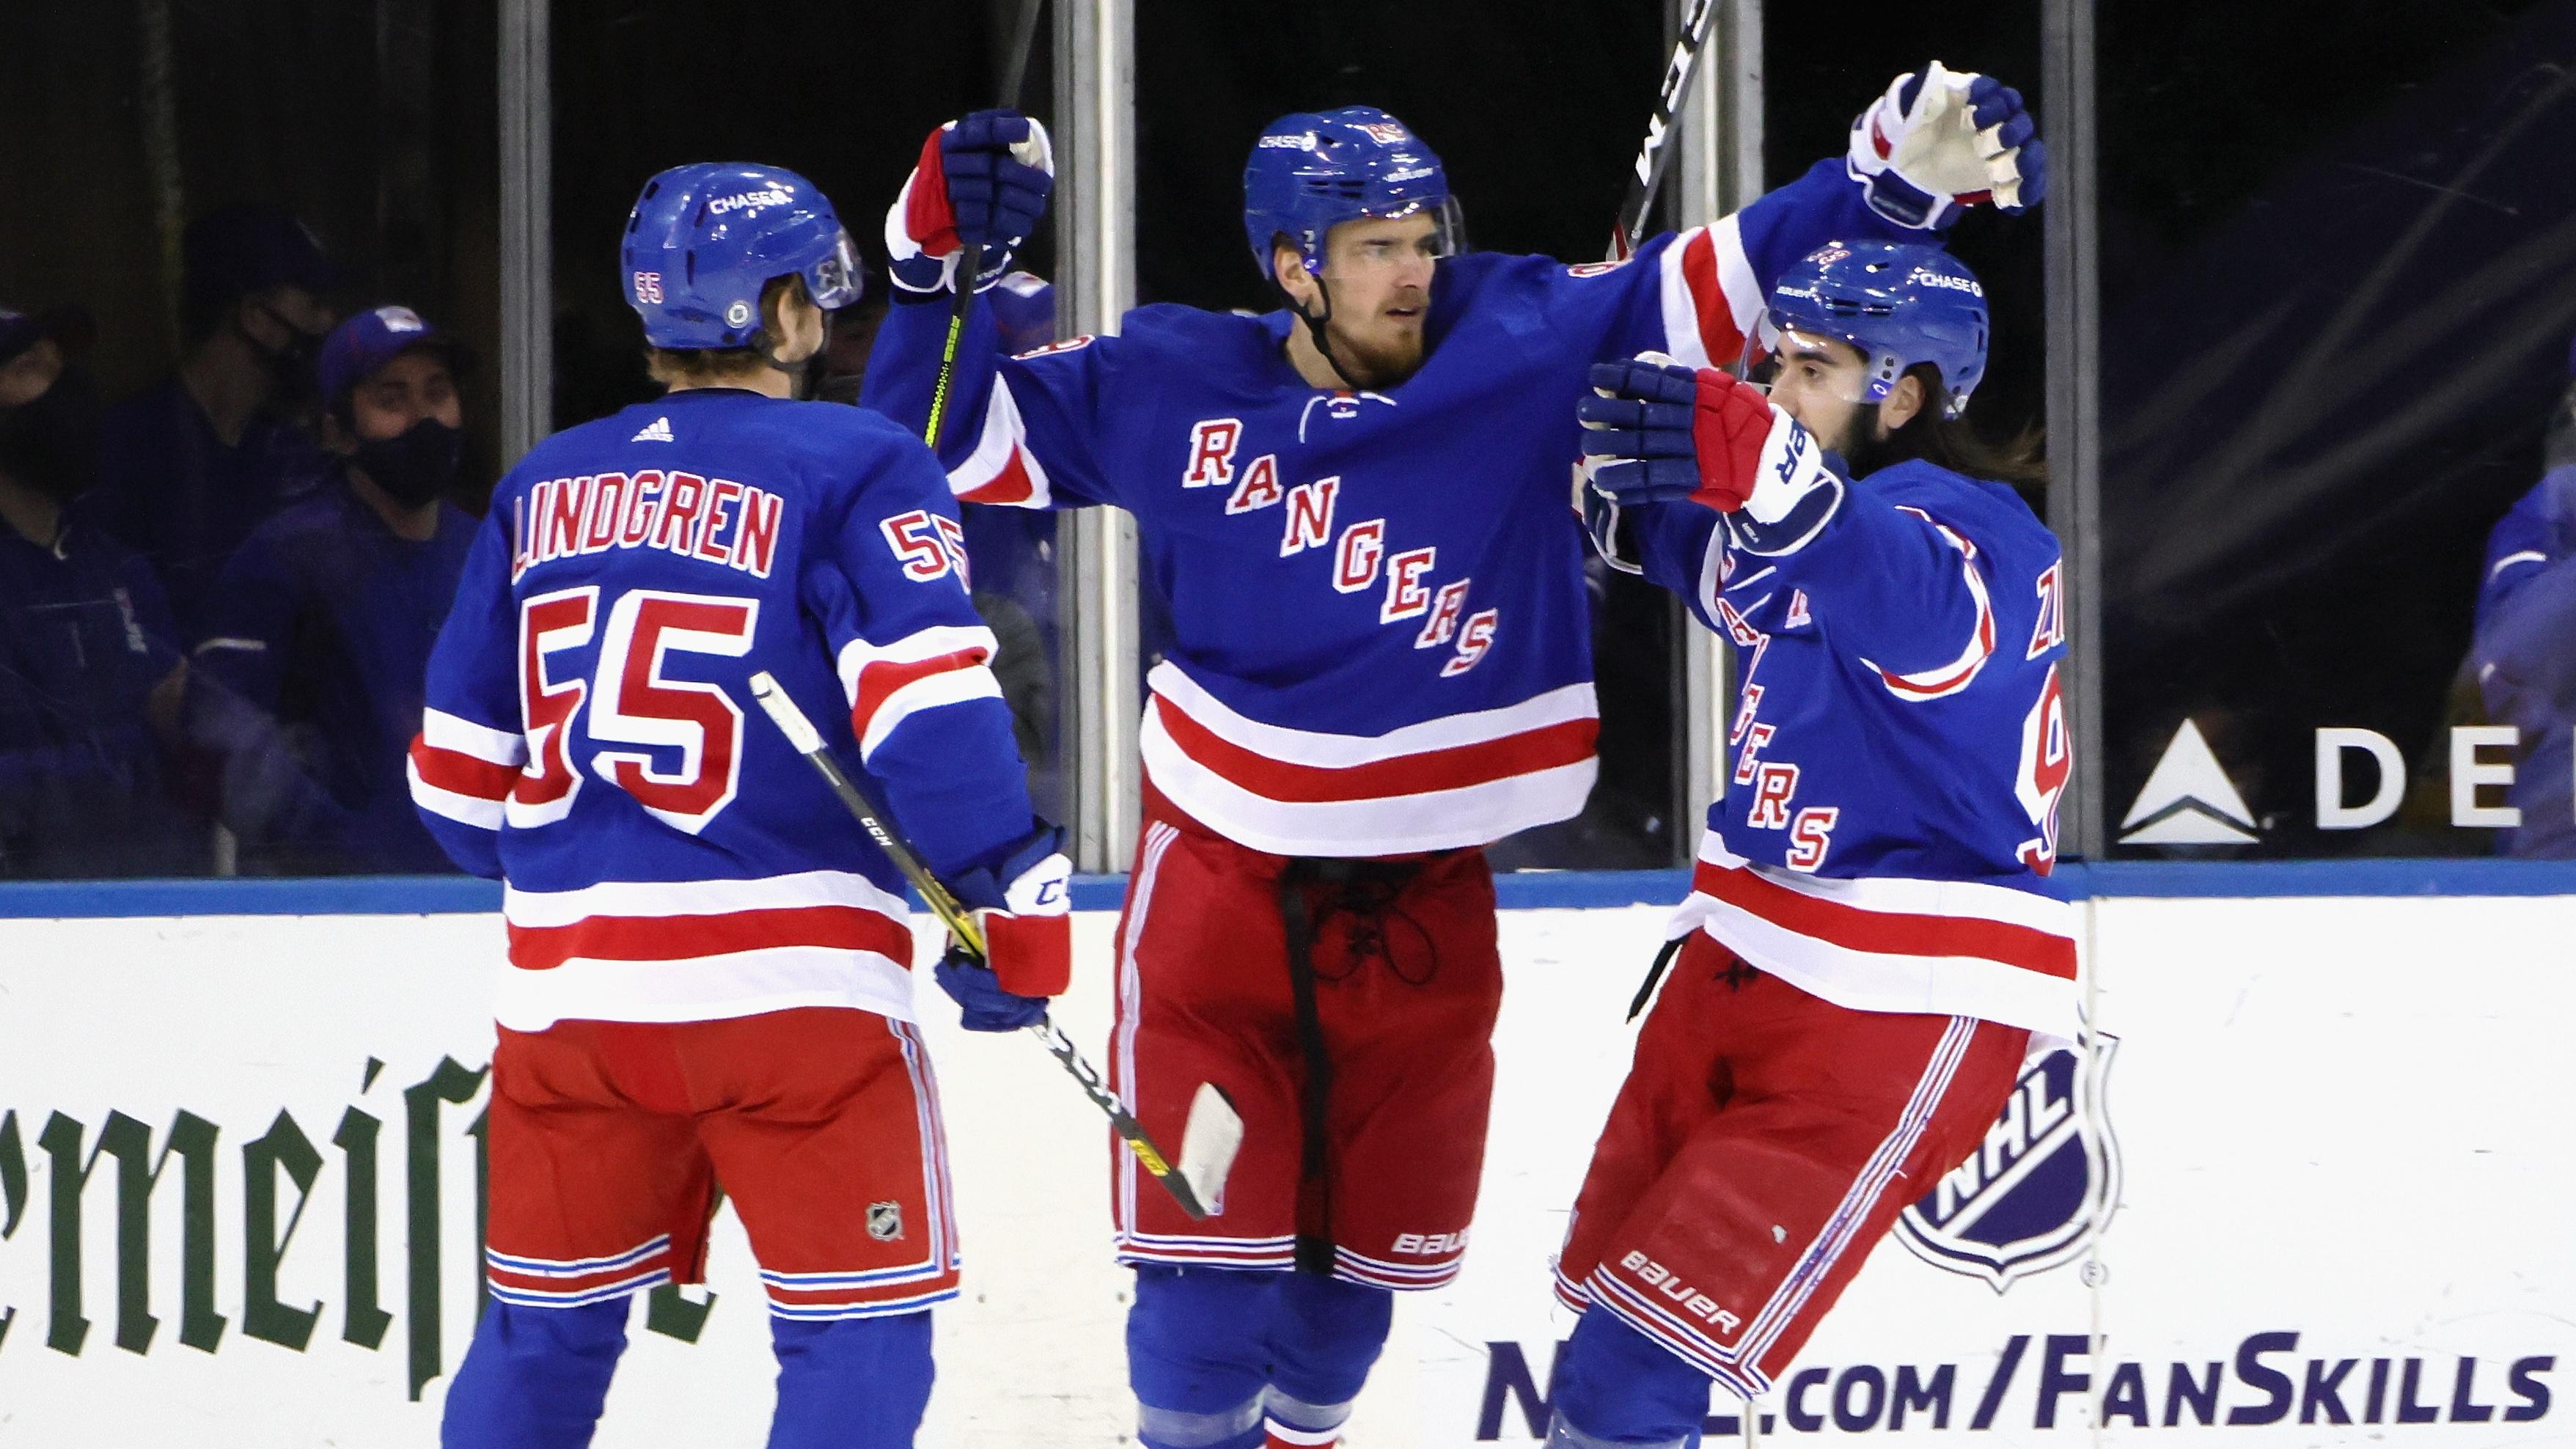 Apr 6, 2021; New York, New York, USA; Mika Zibanejad #93 of the New York Rangers (R) celebrates his goal at 7:28 of the first period against the Pittsburgh Penguins and is joined by Ryan Lindgren #55 (L) and Pavel Buchnevich #89 (C) at Madison Square Garden on April 06, 2021 in New York City.. / © POOL PHOTOS-USA TODAY Sports